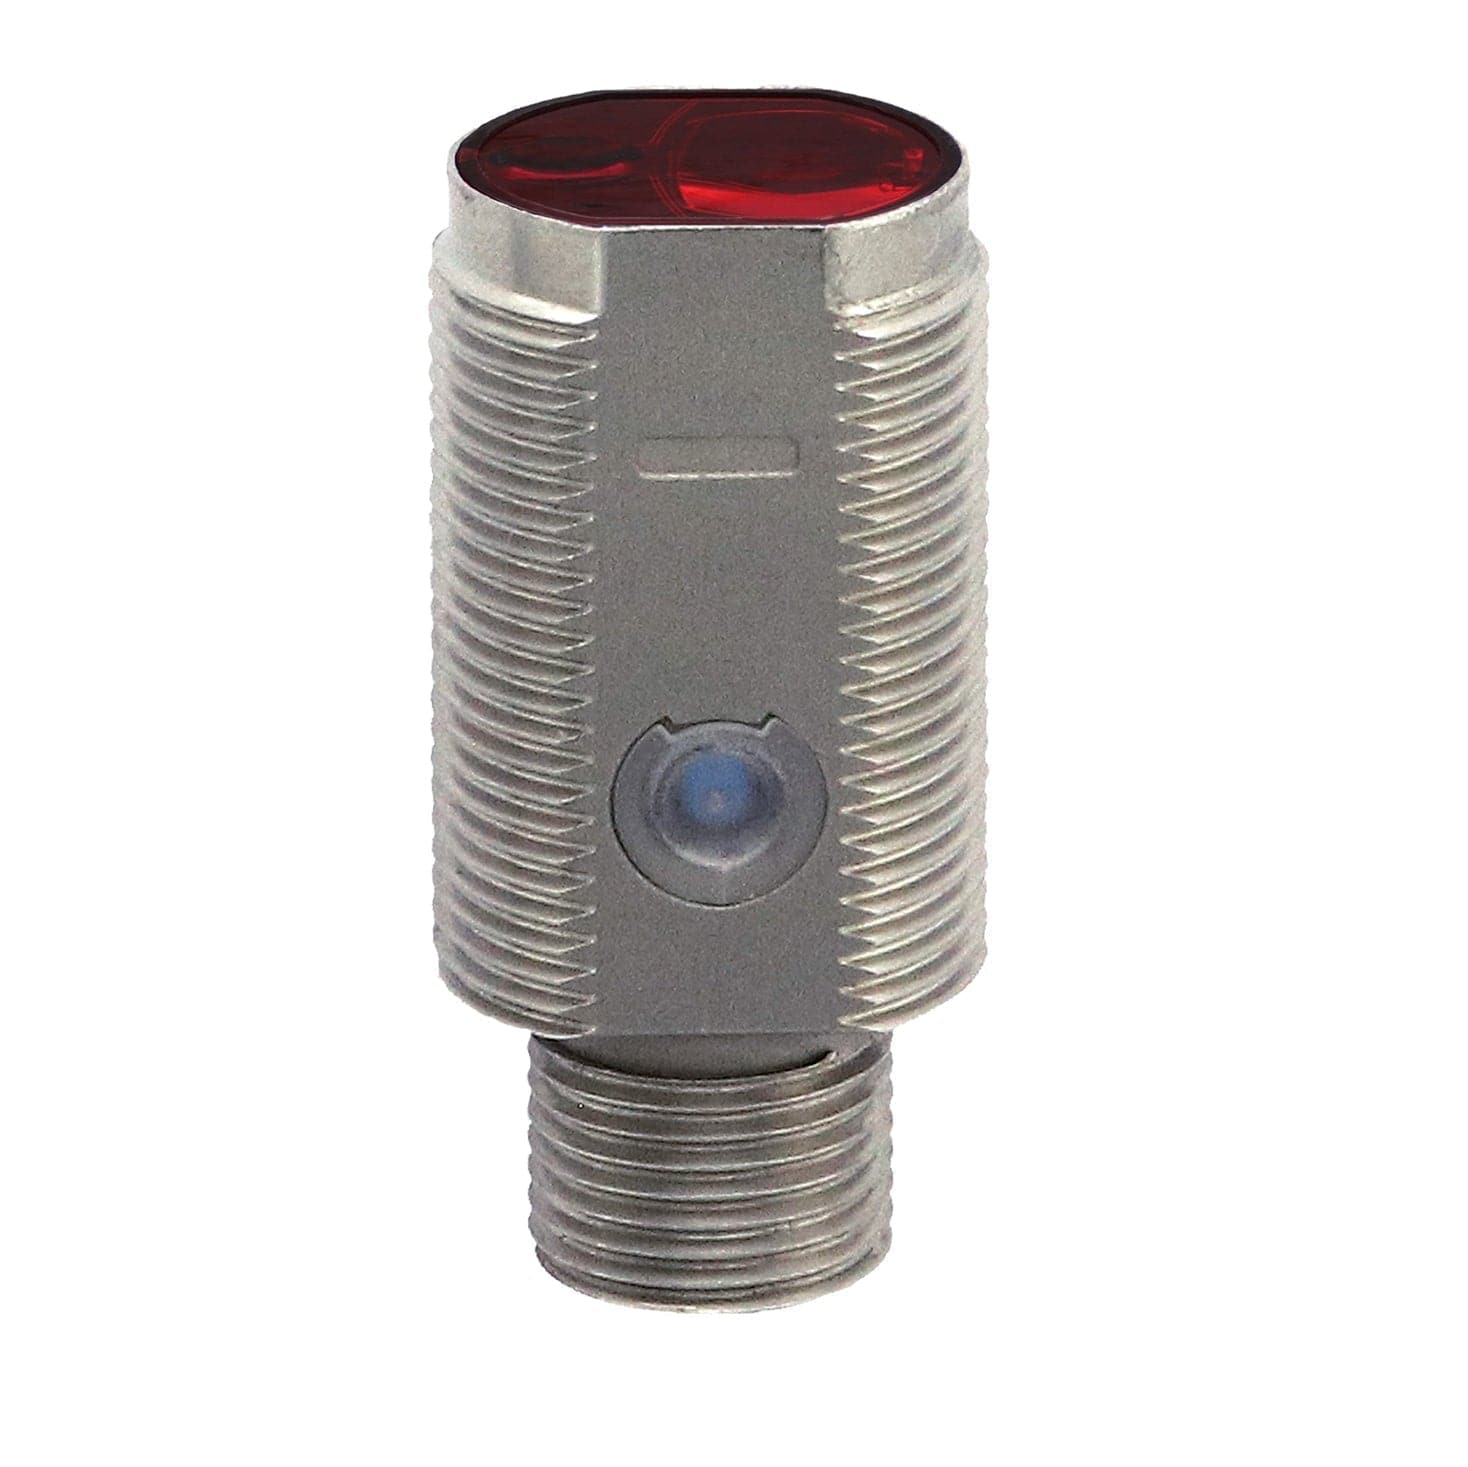 Standard Background suppression M18 15...210 mm Stainless steel V2A Teach button Pinpoint LED, red 640 nm